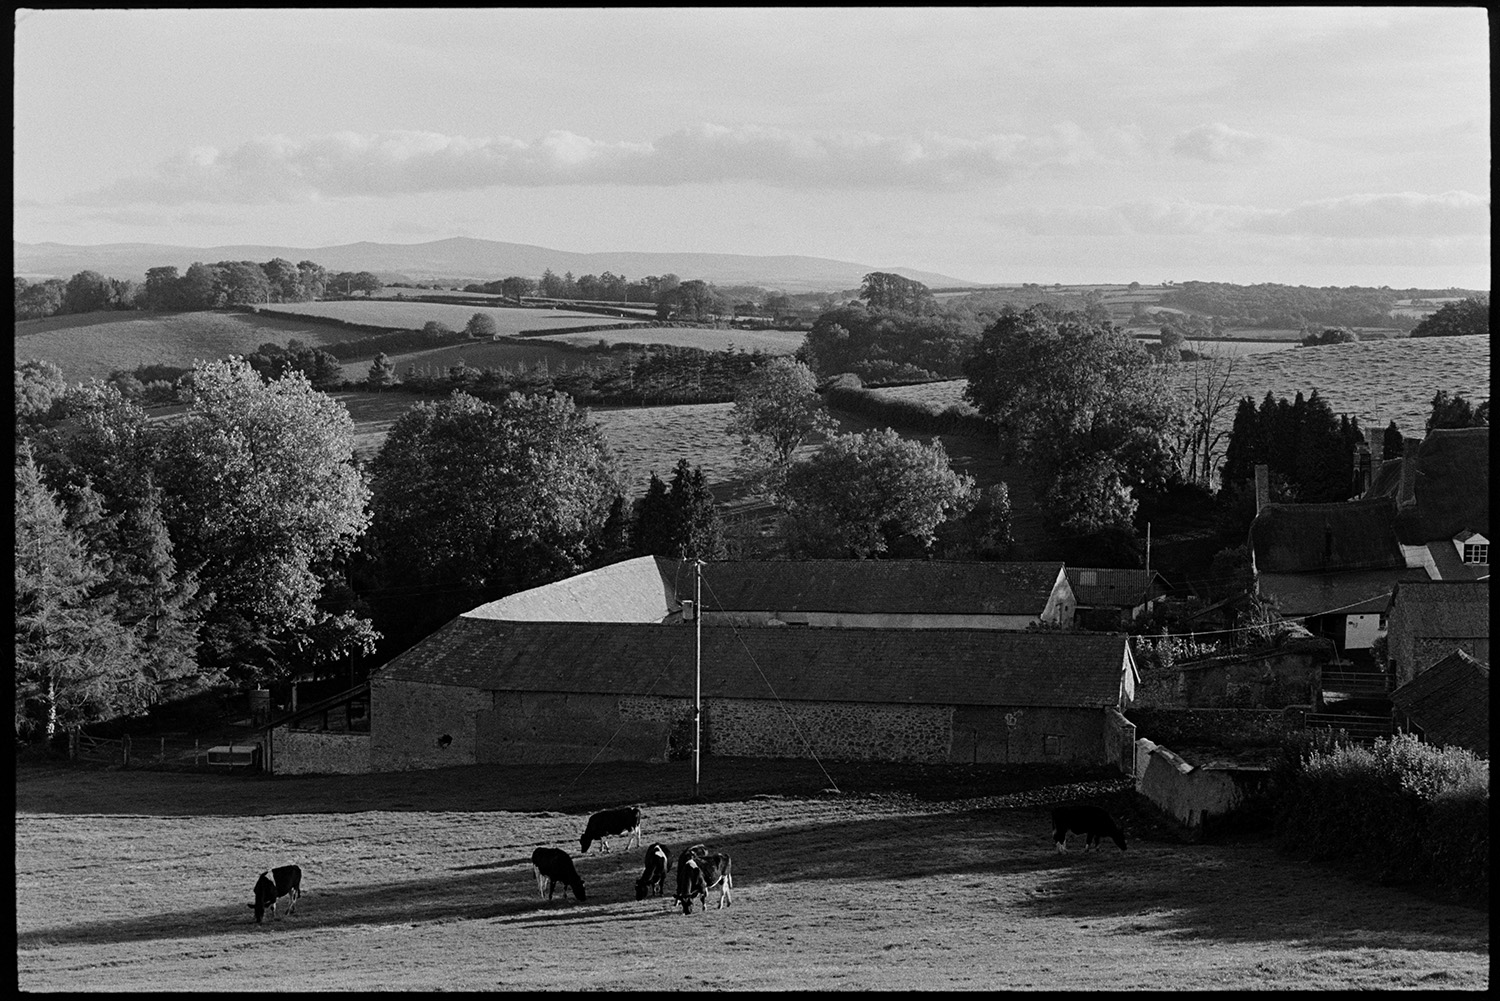 Landscape towards Dartmoor, with farm and cattle, evening shadows.
[Cows grazing in a field at West Park Farm, Iddesleigh. The farmhouse and cob barns in a landscape with trees and fields is visible in the background. Long evening shadows are falling across the fields and Dartmoor can be seen on the horizon.]